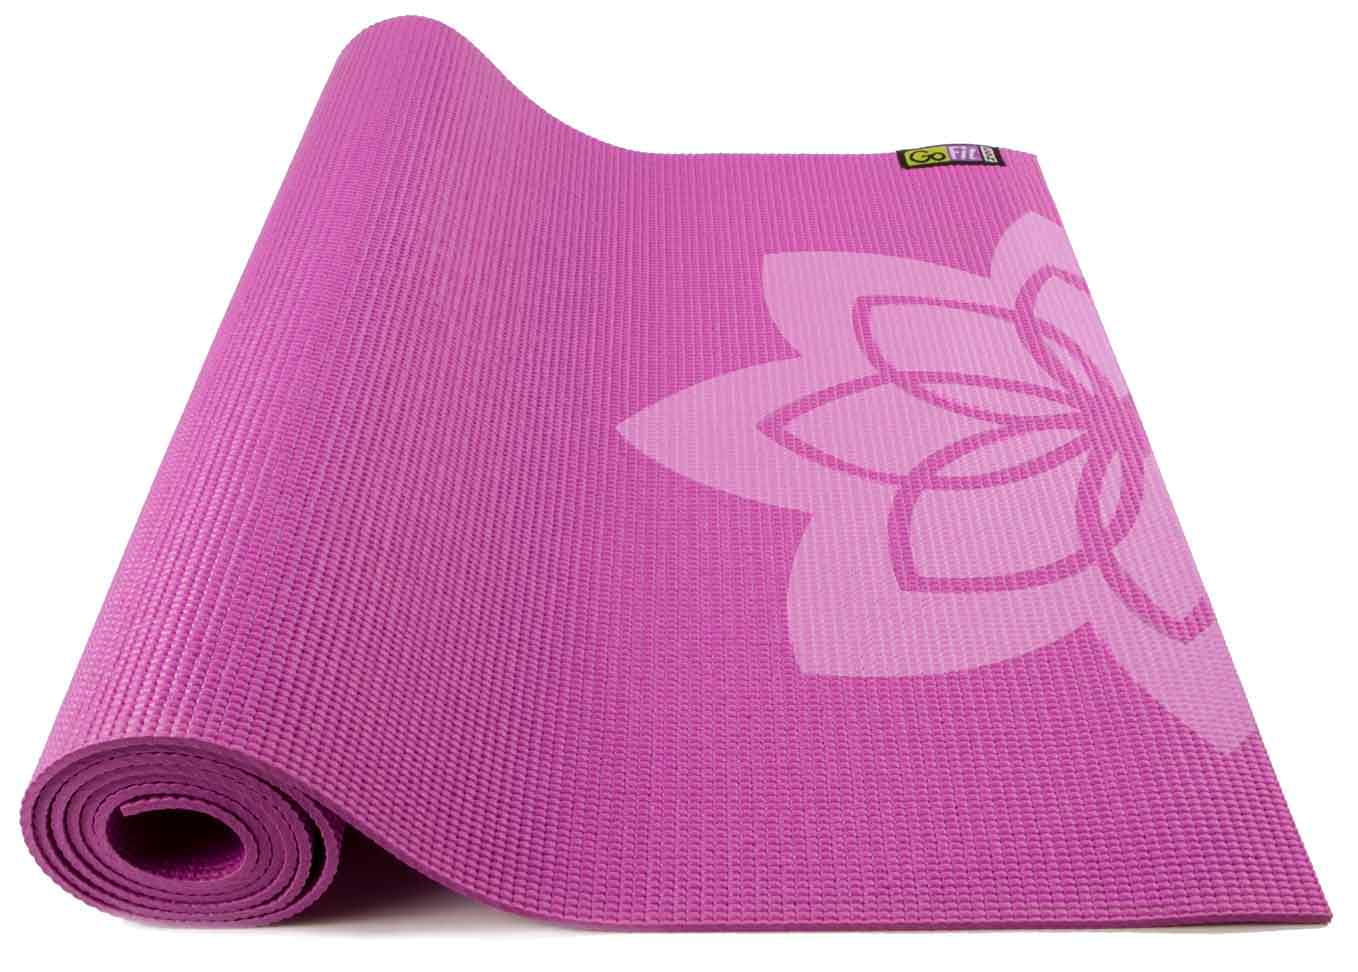  Gaiam Yoga Mat Classic Print Non Slip Exercise & Fitness Mat  for All Types of Yoga, Pilates & Floor Workouts, Aubergine Point, 4mm :  Sports & Outdoors